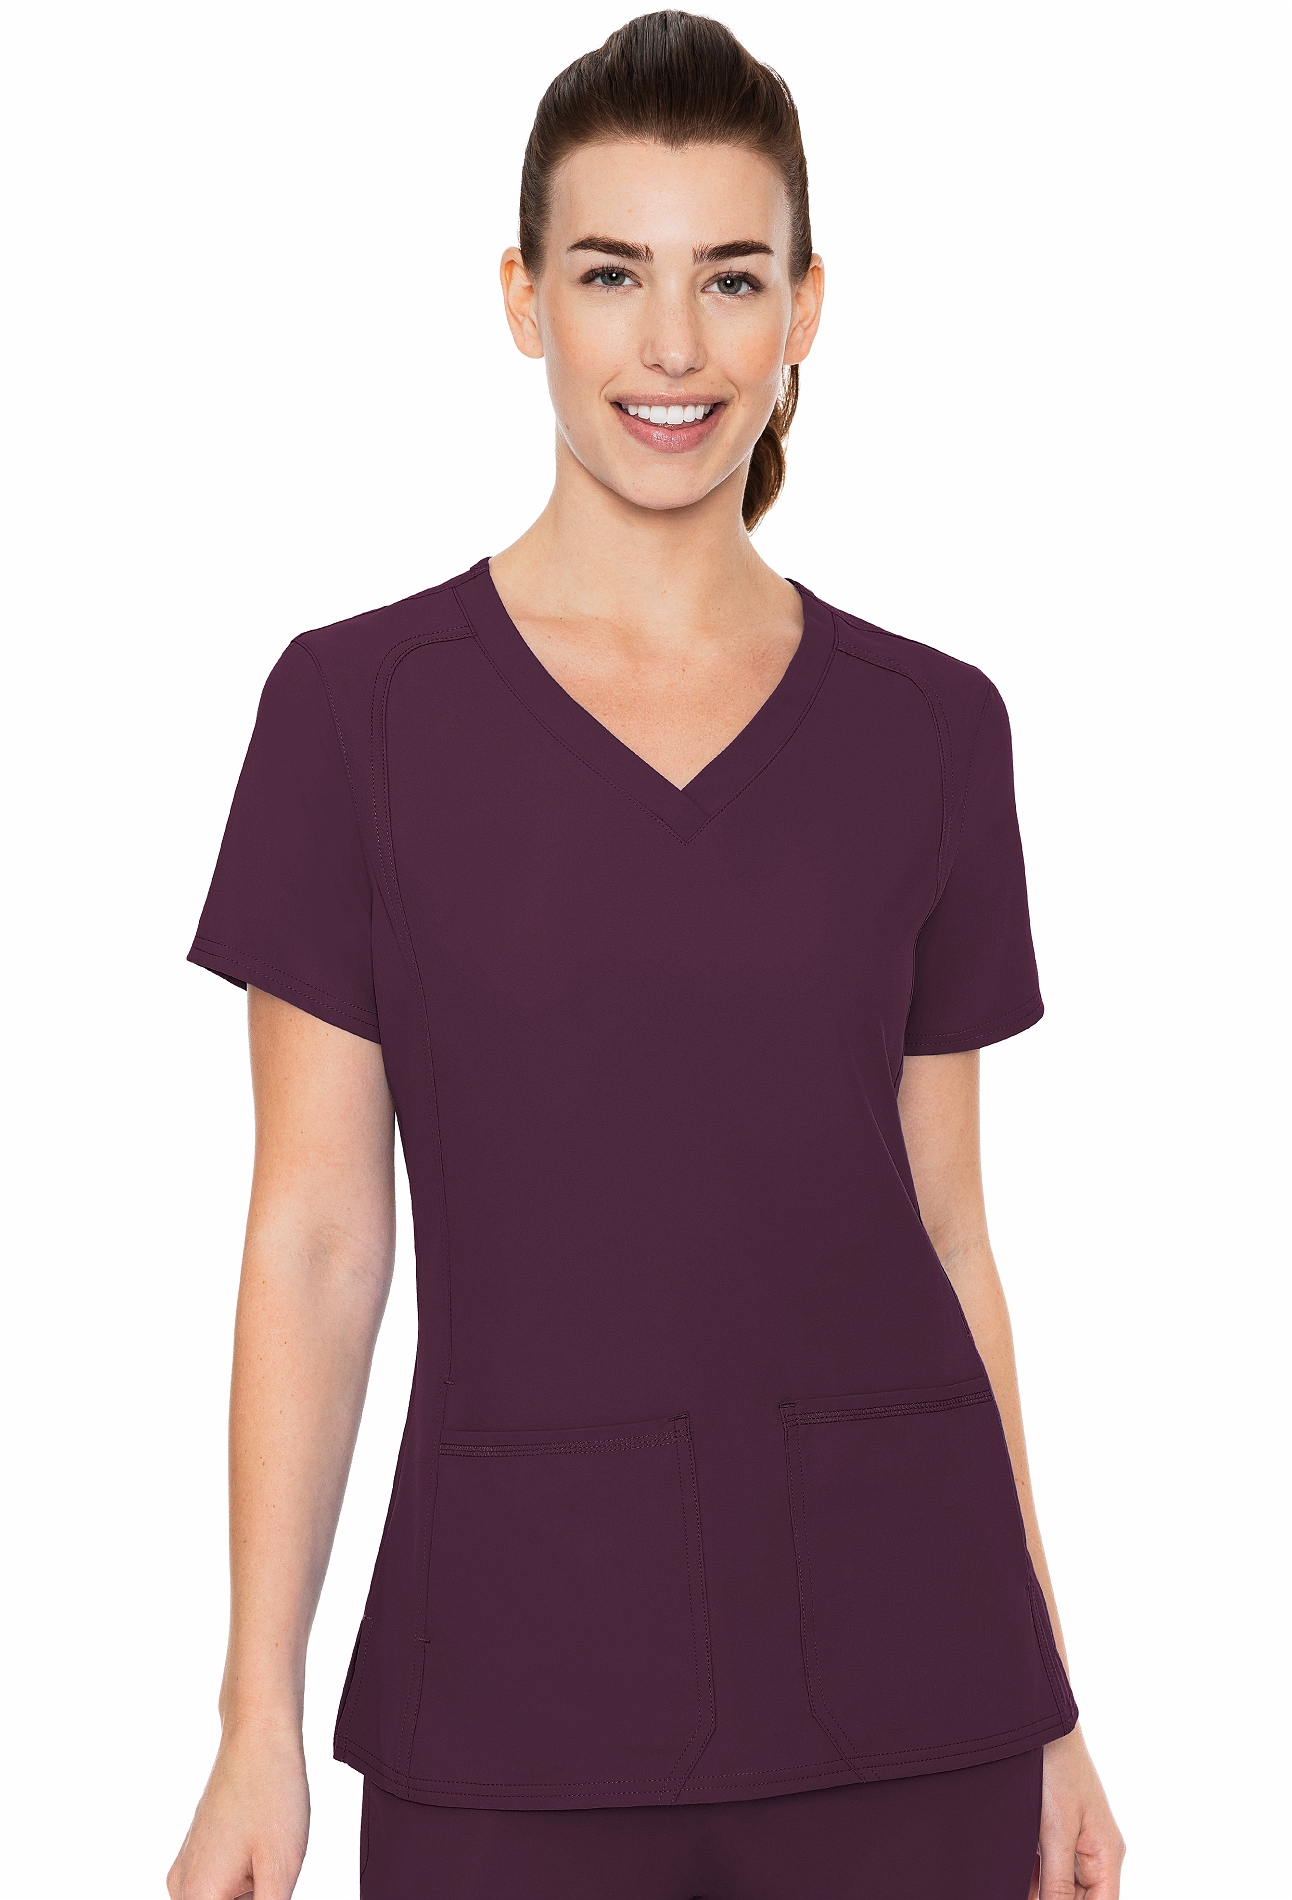 Med Couture Insight Women's 4 Pocket Scrub Top-MC2468